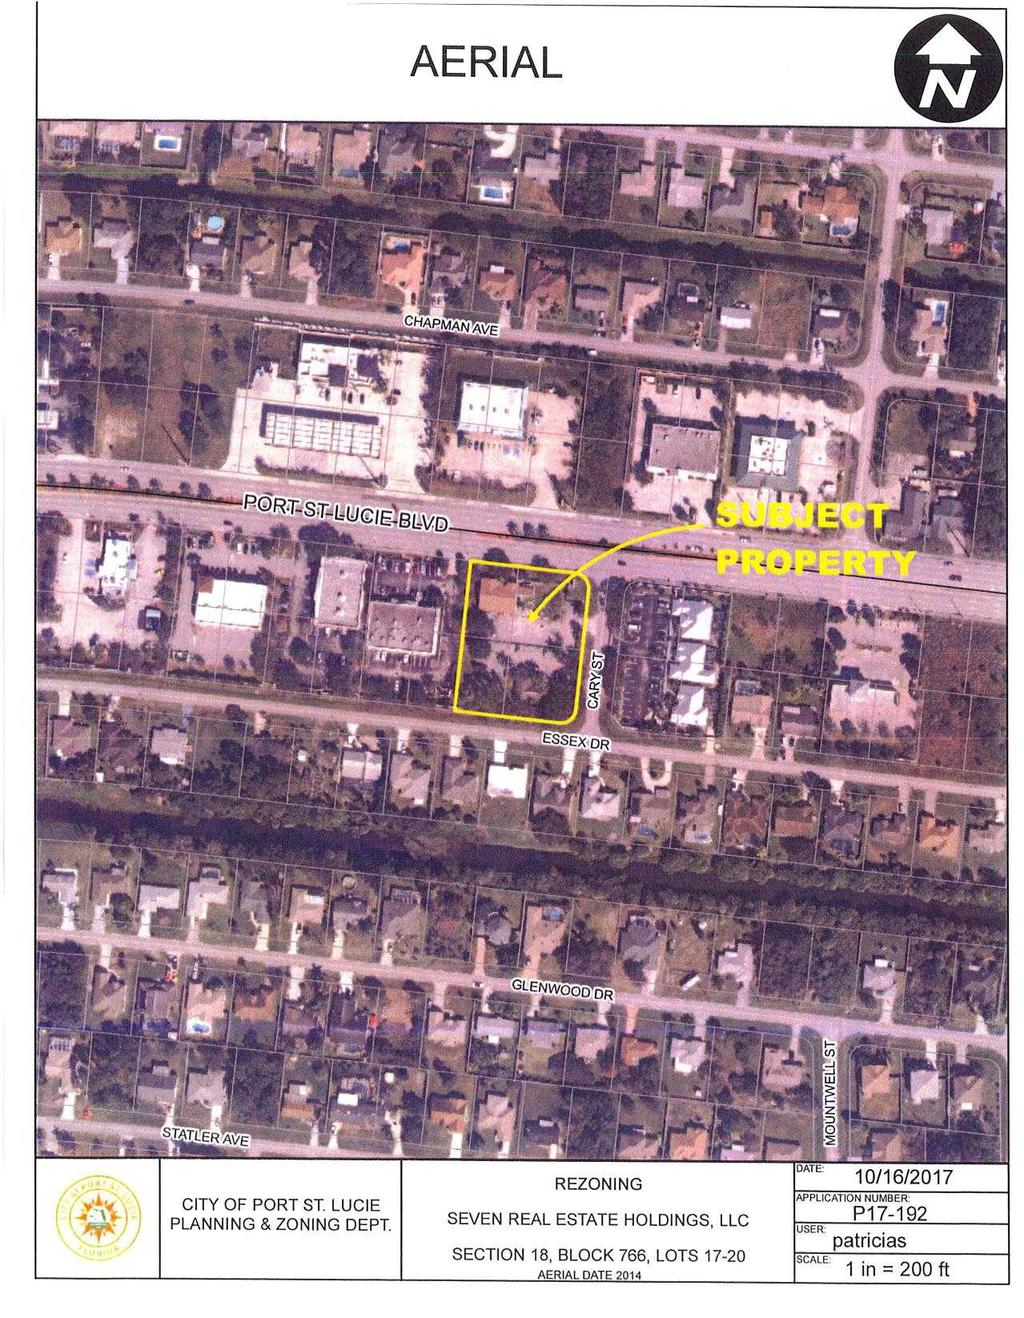 AERIAL CITY OF PORT ST. LUCIE PLANNING & ZONING DEPT.